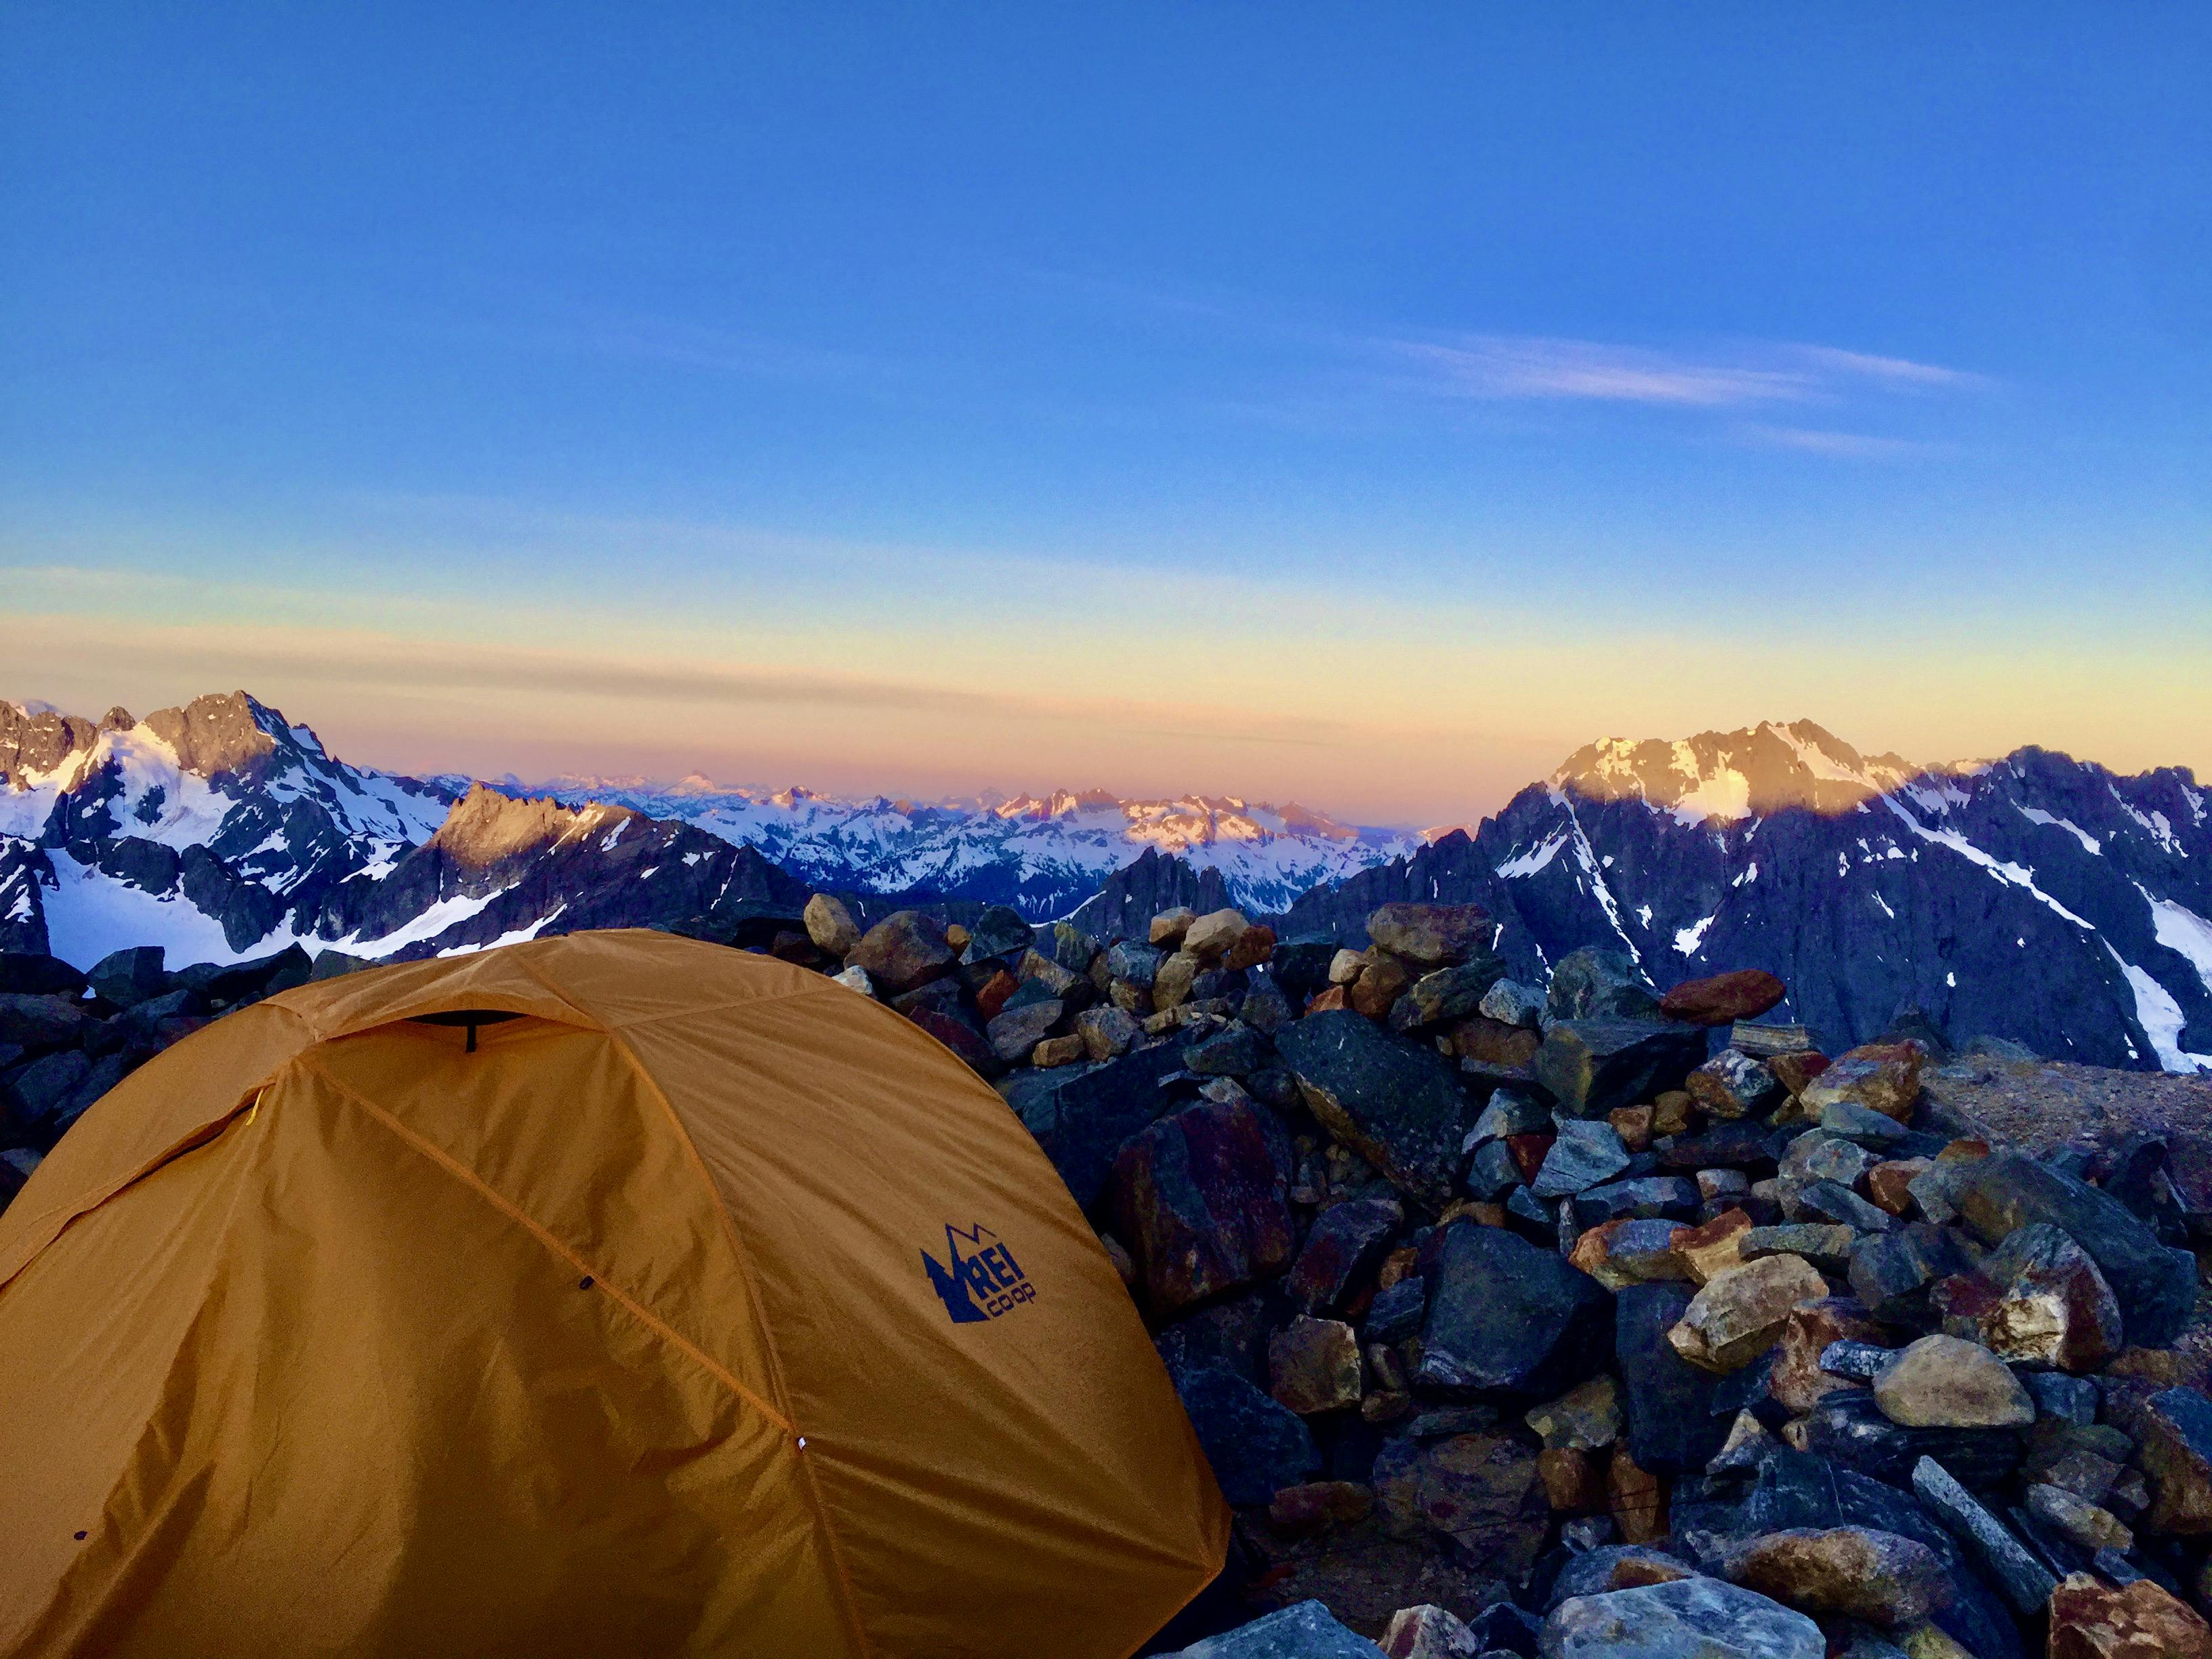 Backpacking trip to Sahale Glacier in North Cascades National Park in Washington. Image credit: Dan Purdy